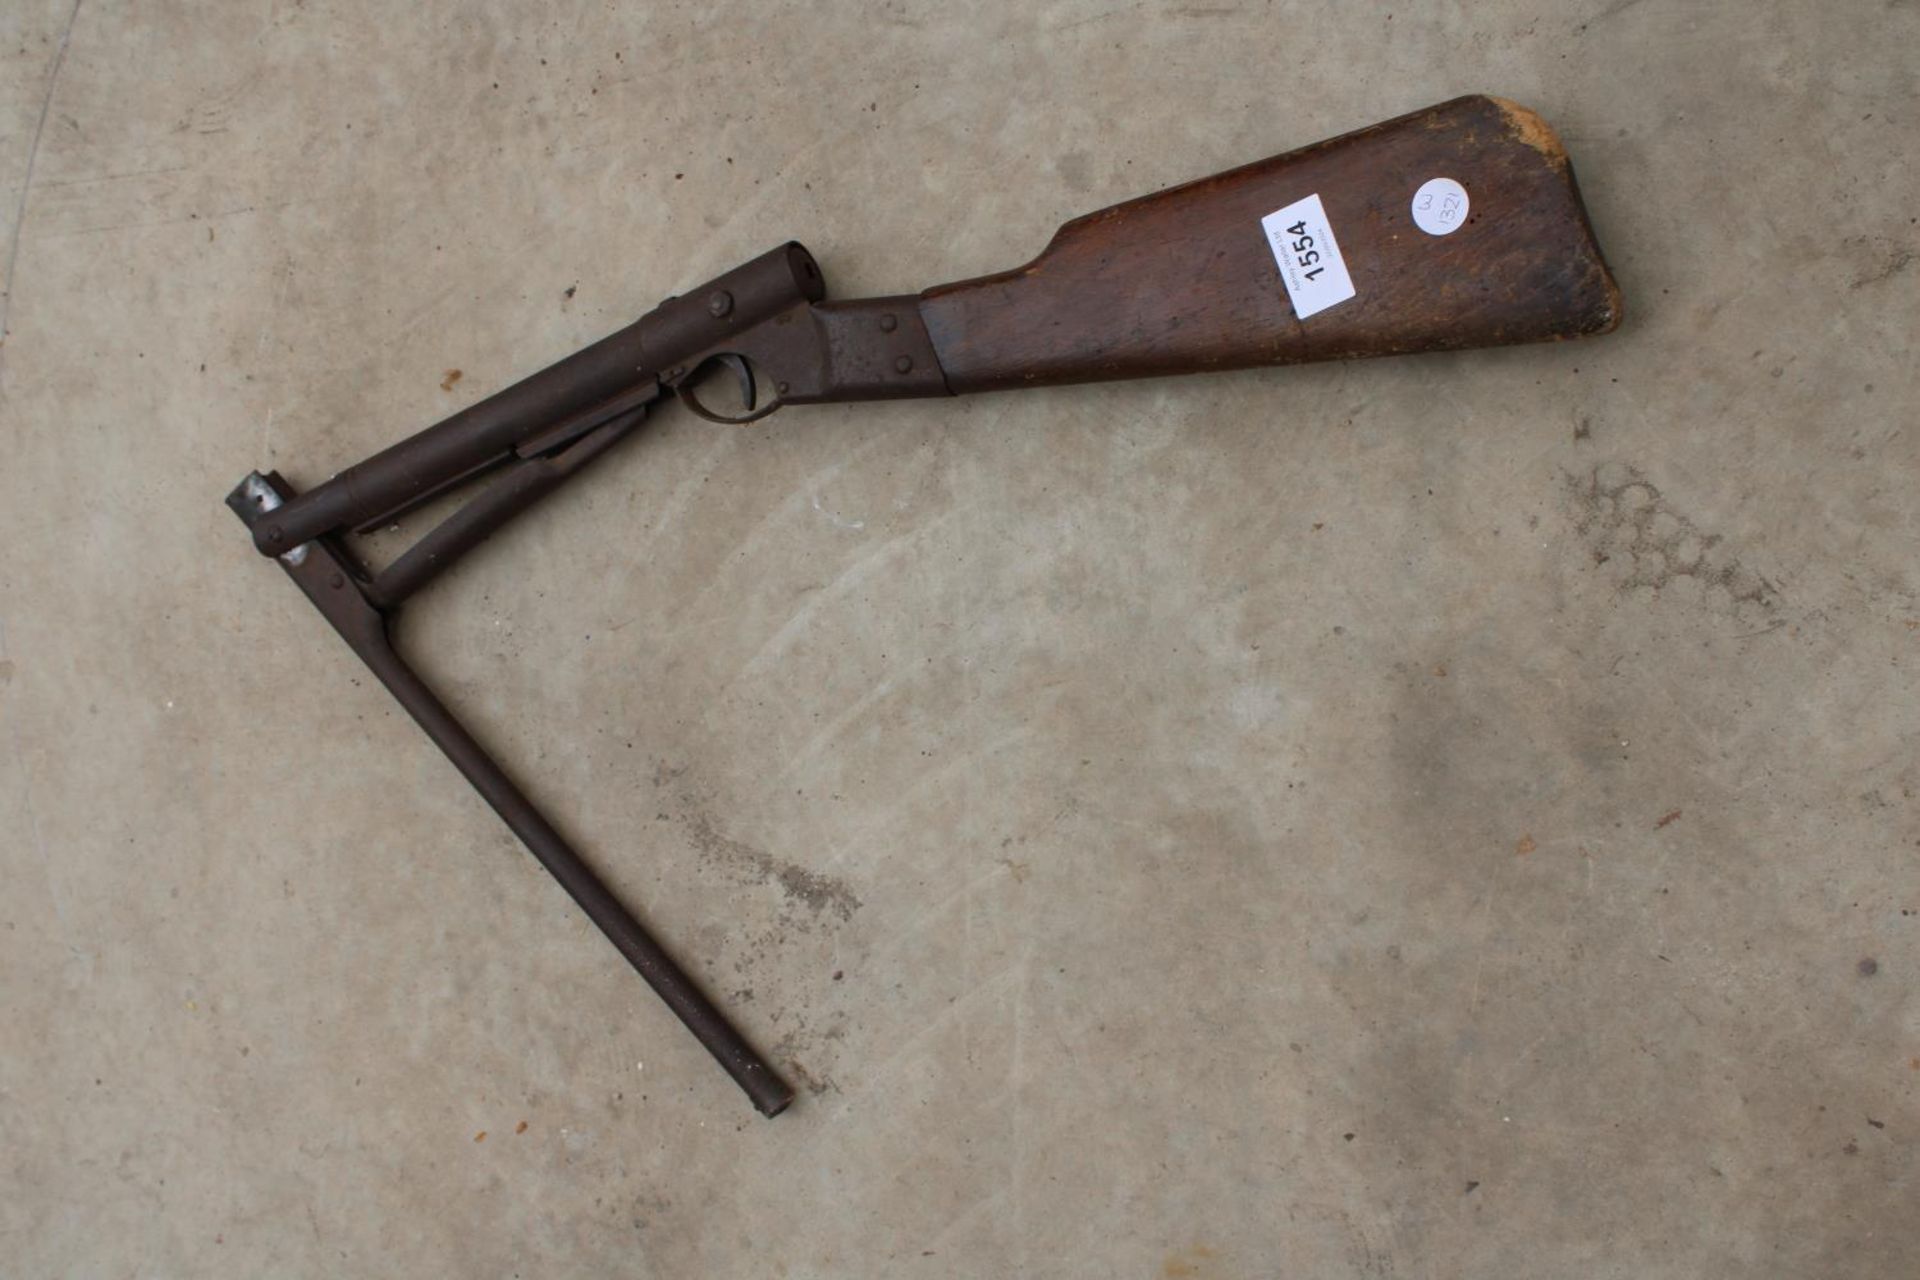 A VINTAGE WOODEN AND METAL AIR RIFLE - Image 2 of 2